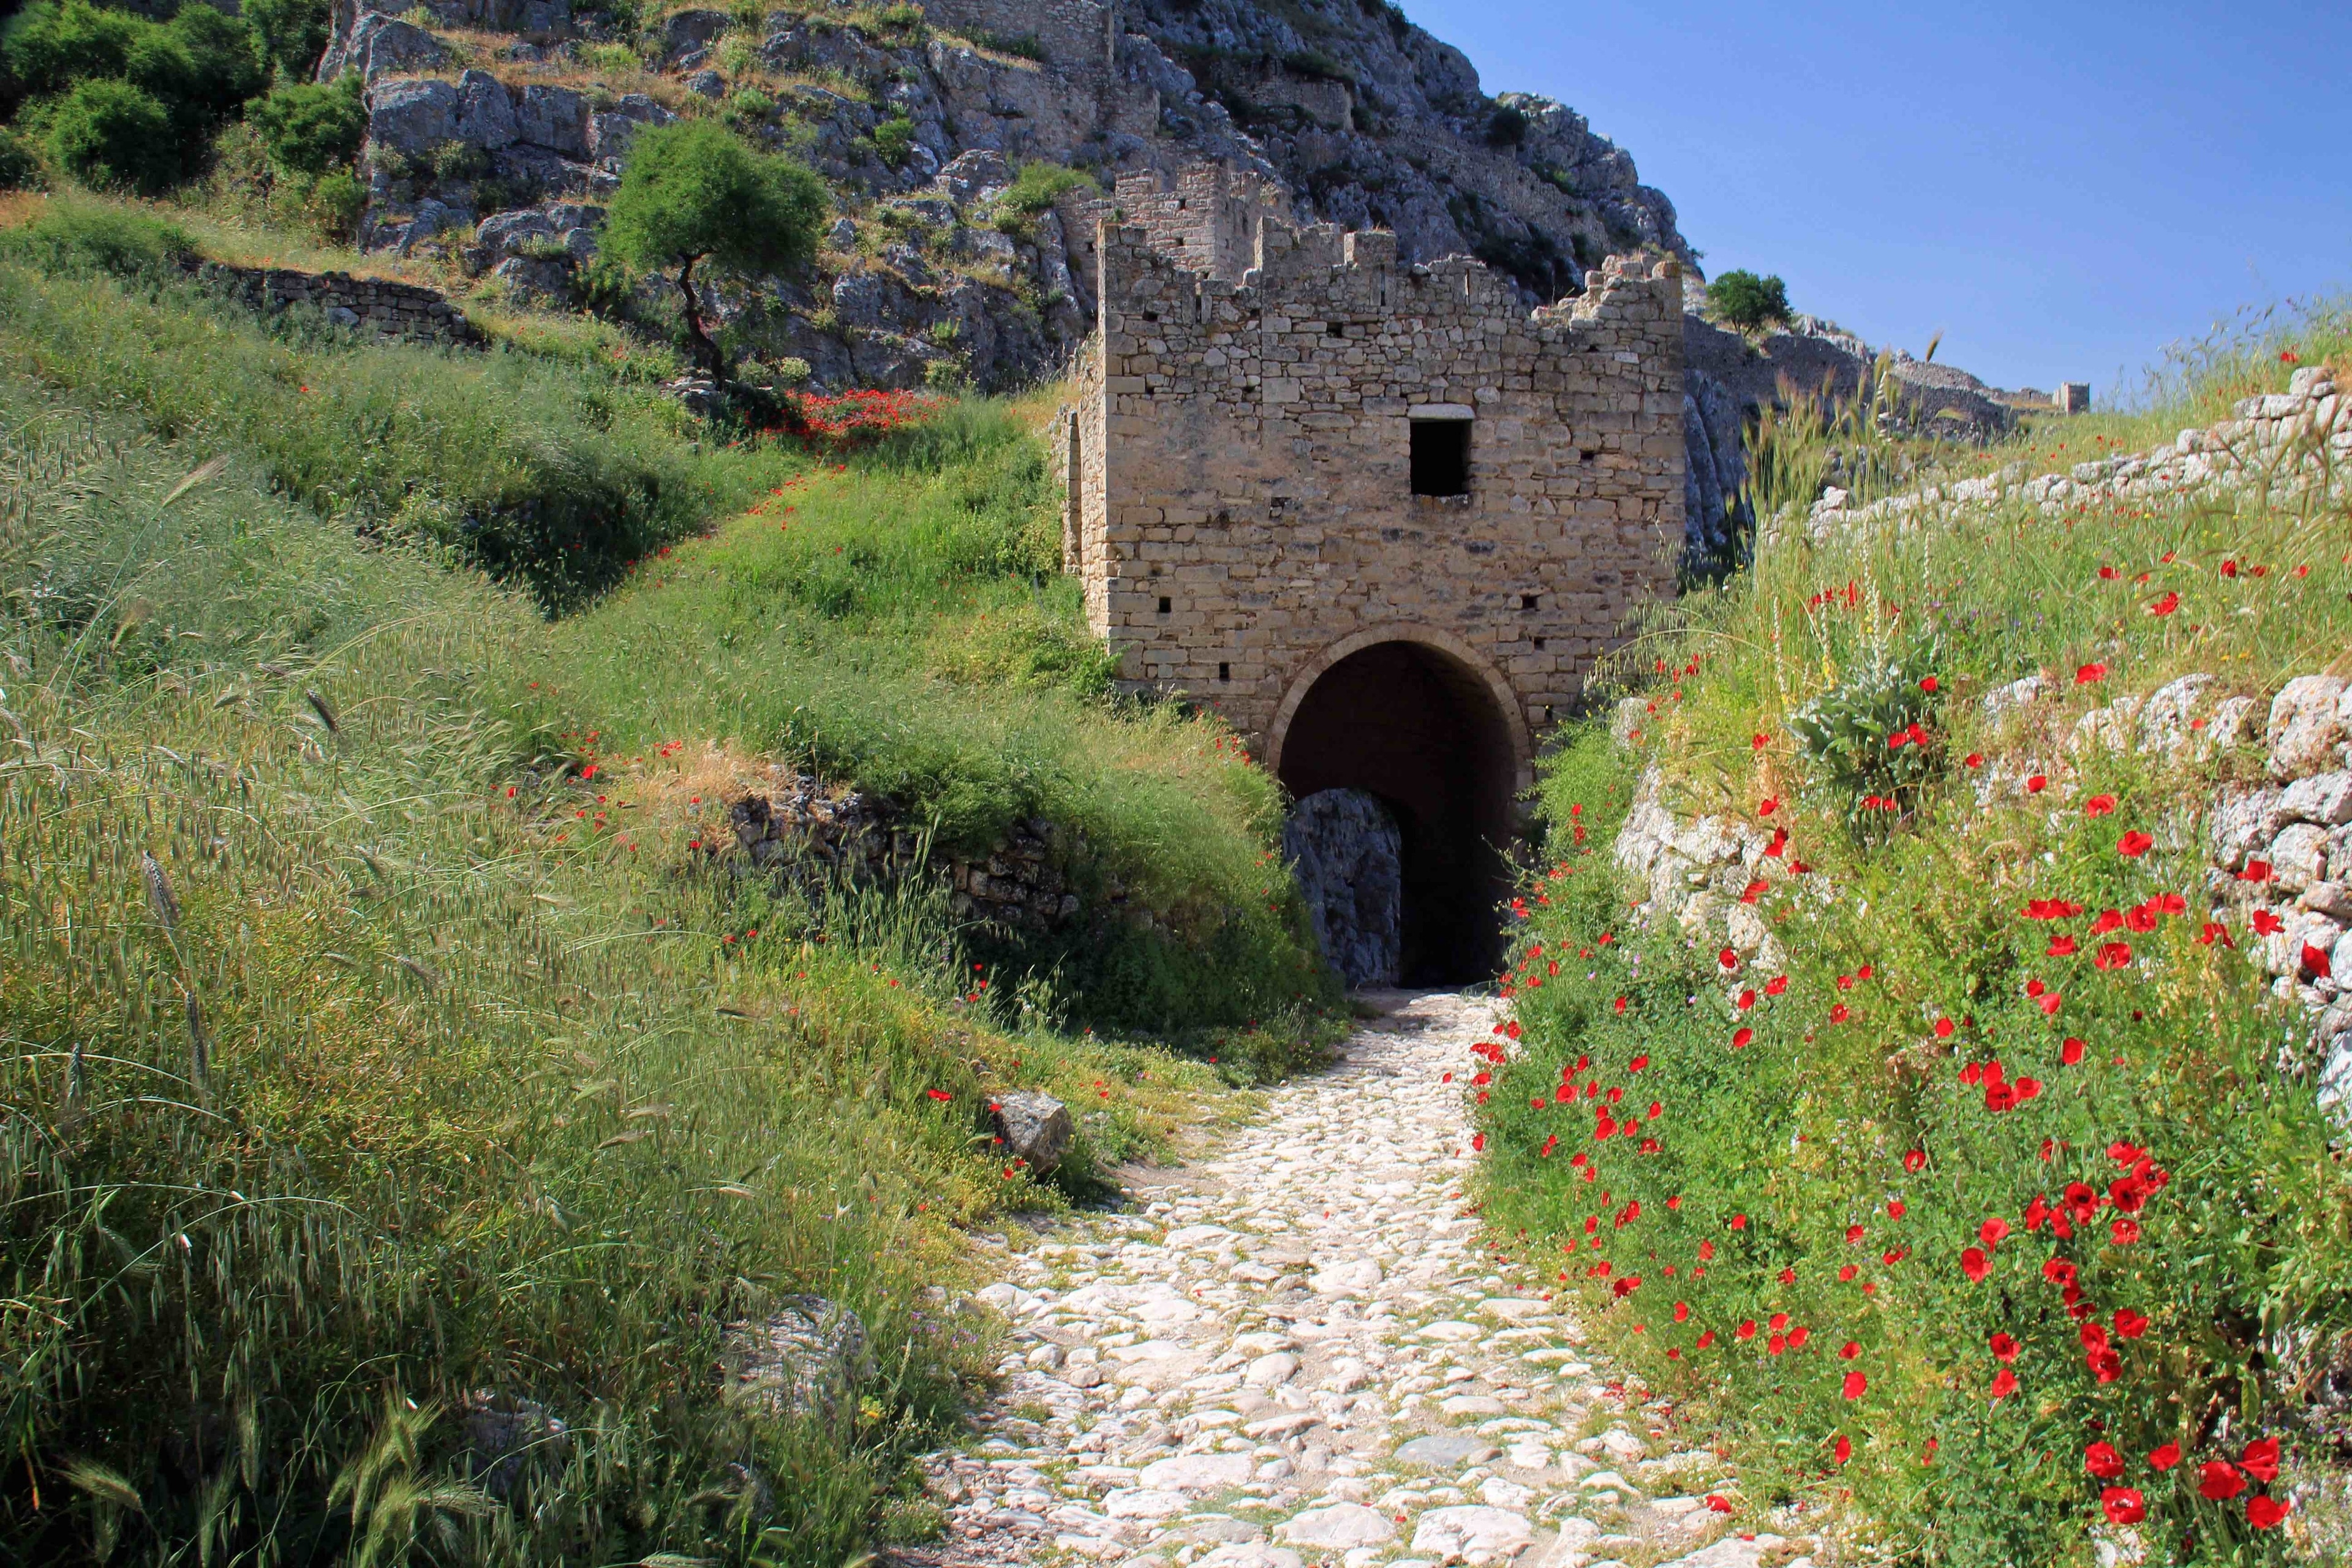 A lot of poppies and wild flowers growing in and around the walls of Acrocrinth fortress. Beautiful place for wandering around and great stop when visiting the Corinth ruins nearby.